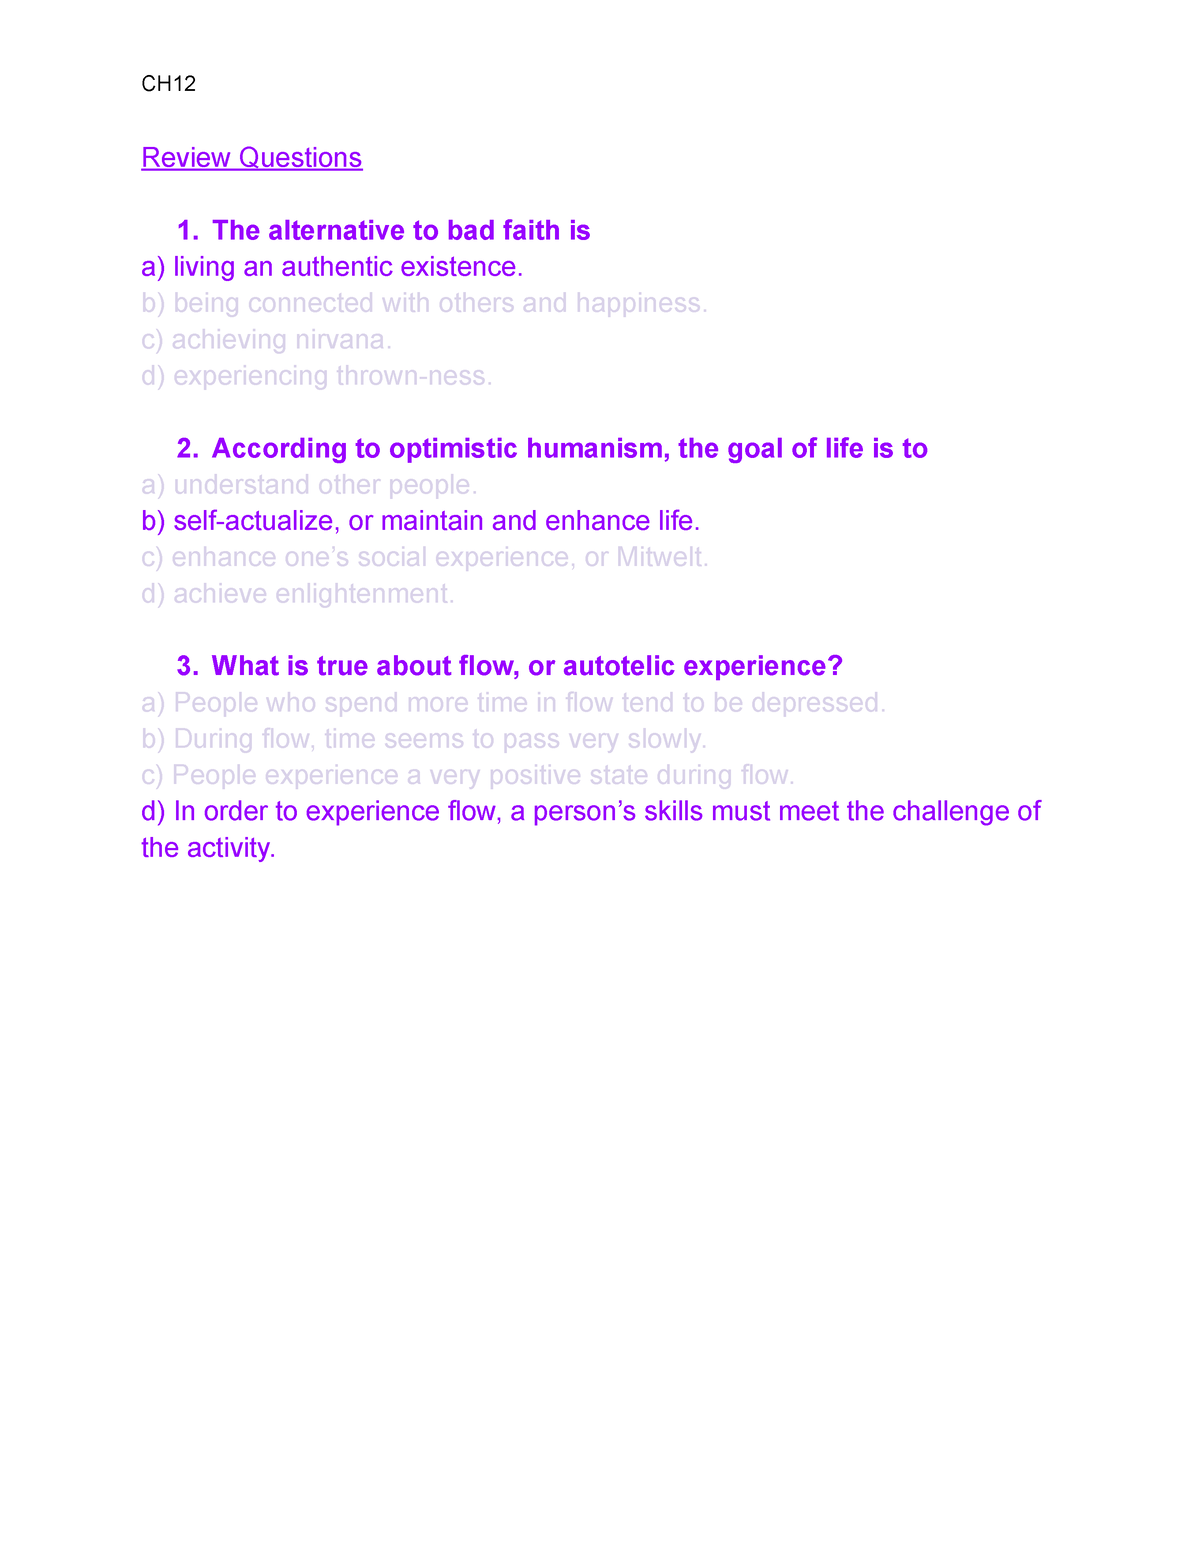 humanistic psychology research questions